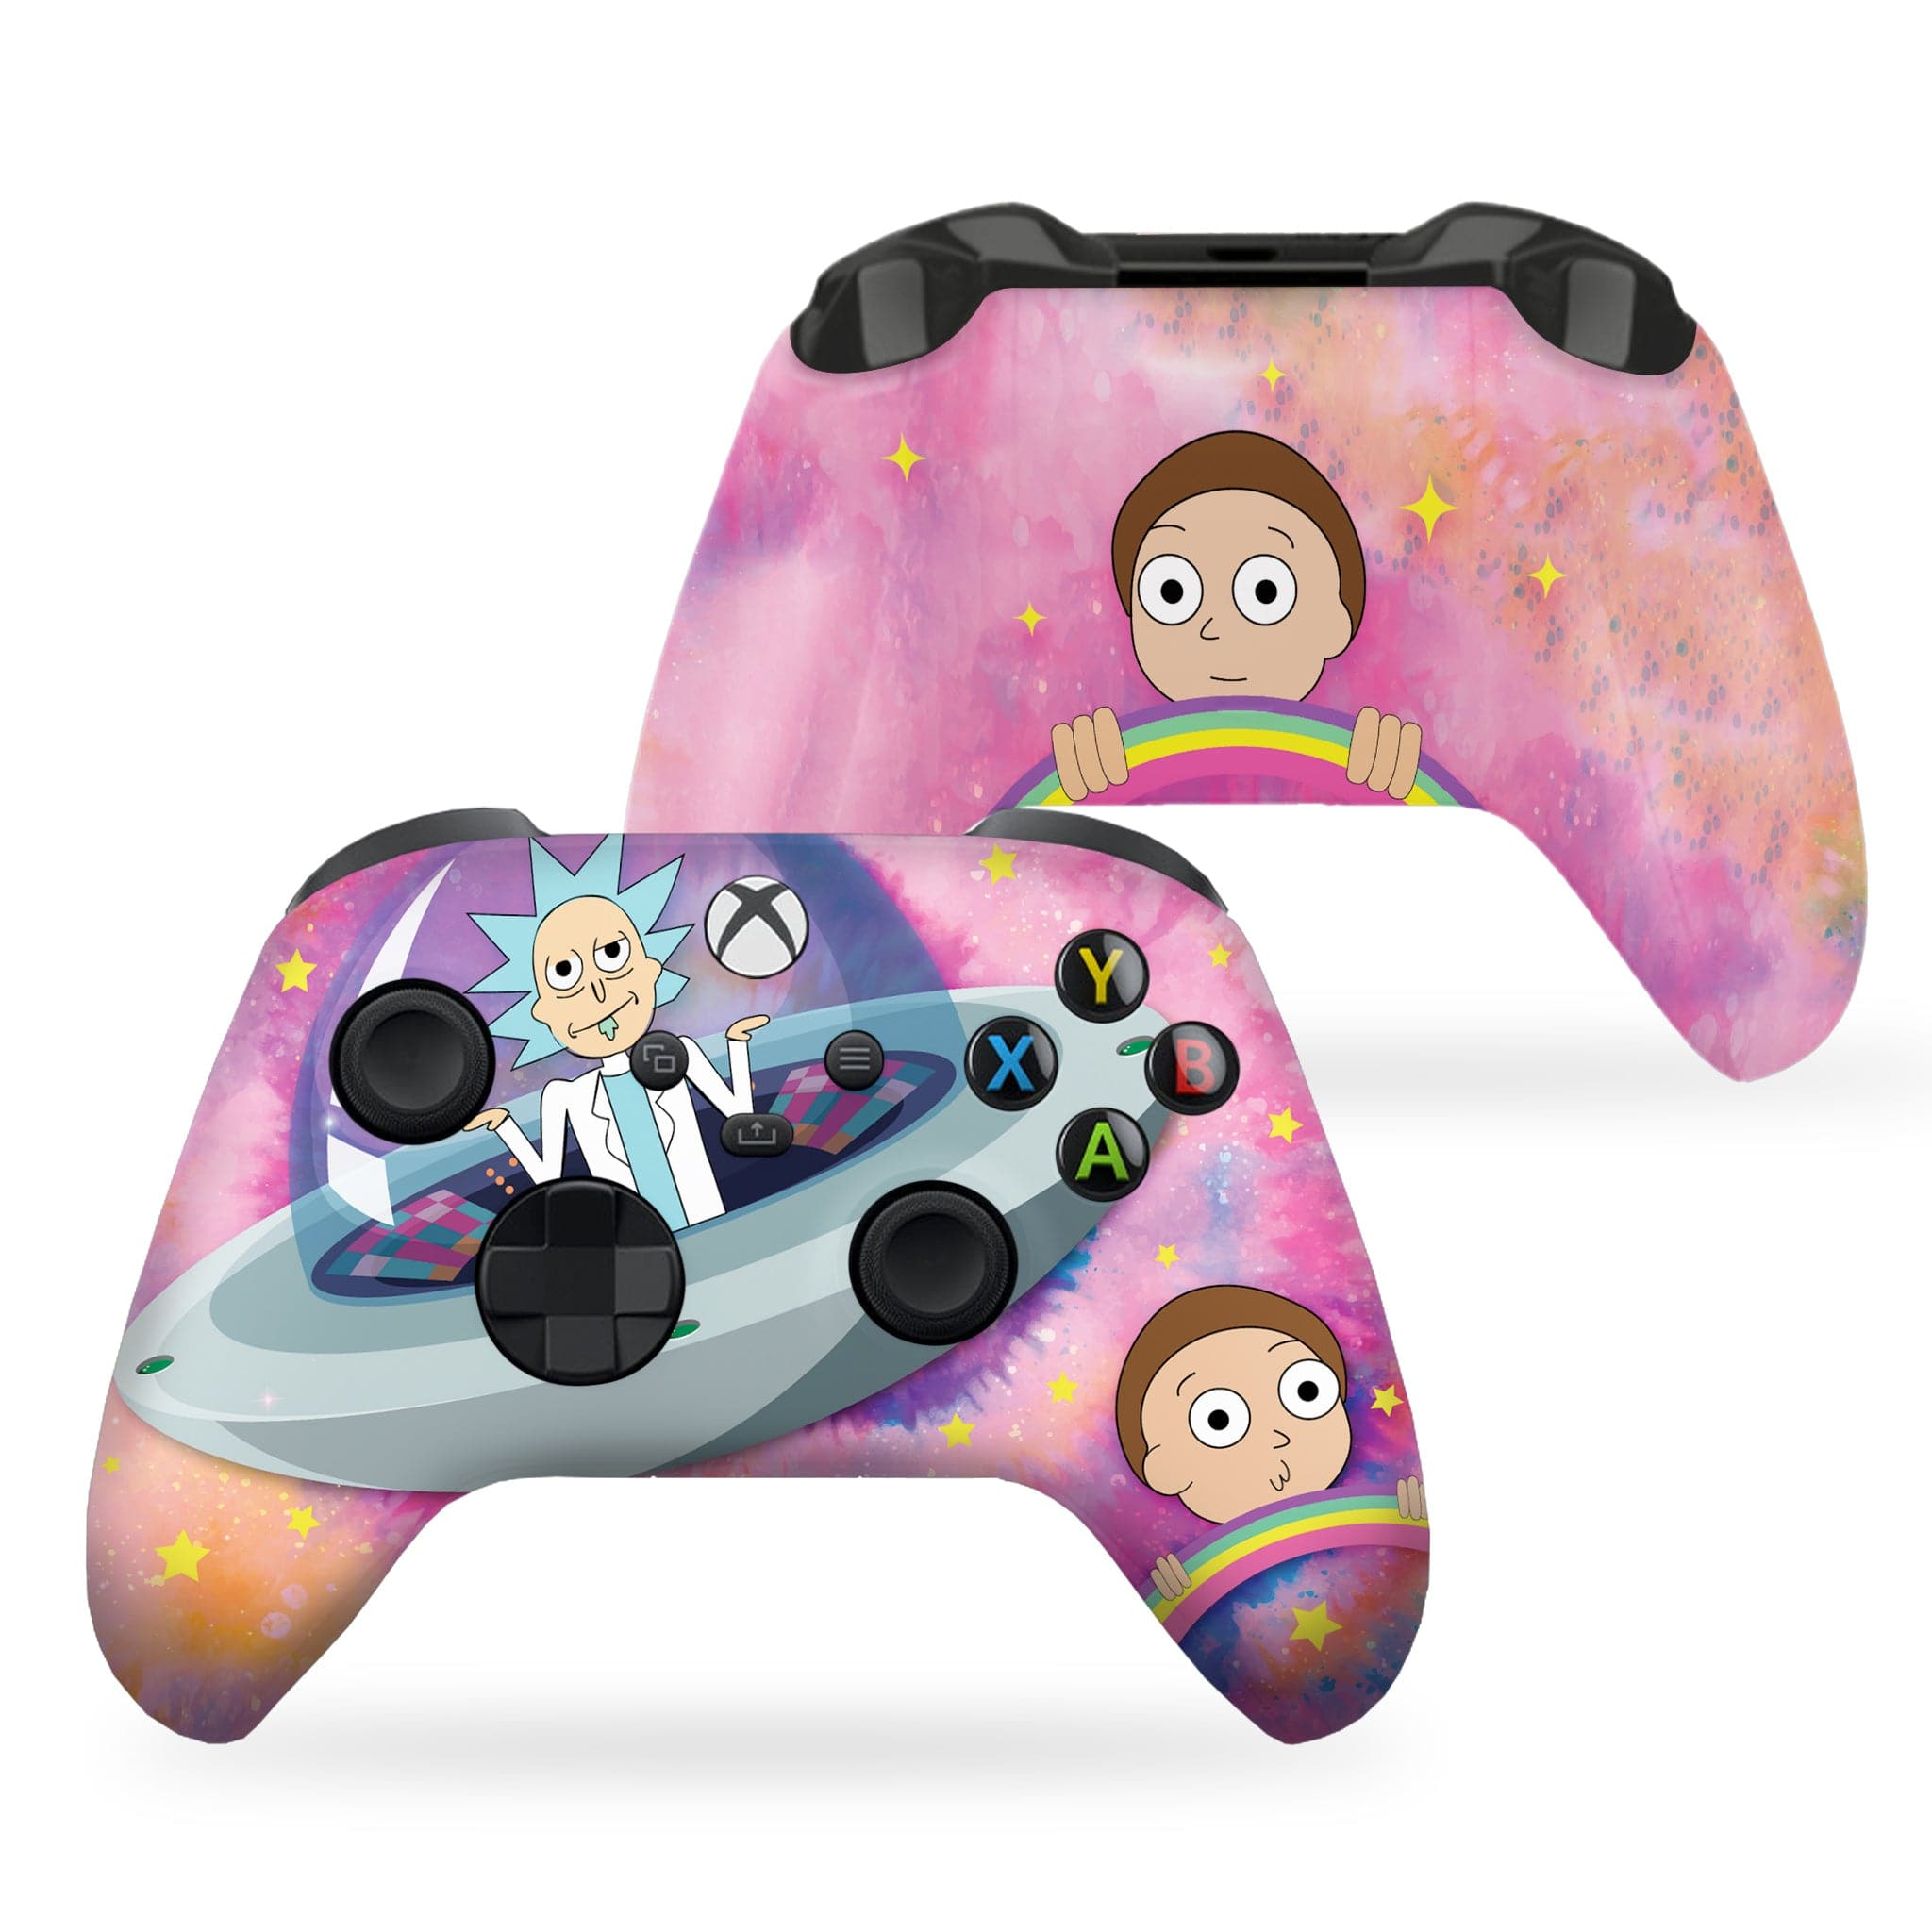 Schwifty Rick & Morty inspired Xbox Series X Controller